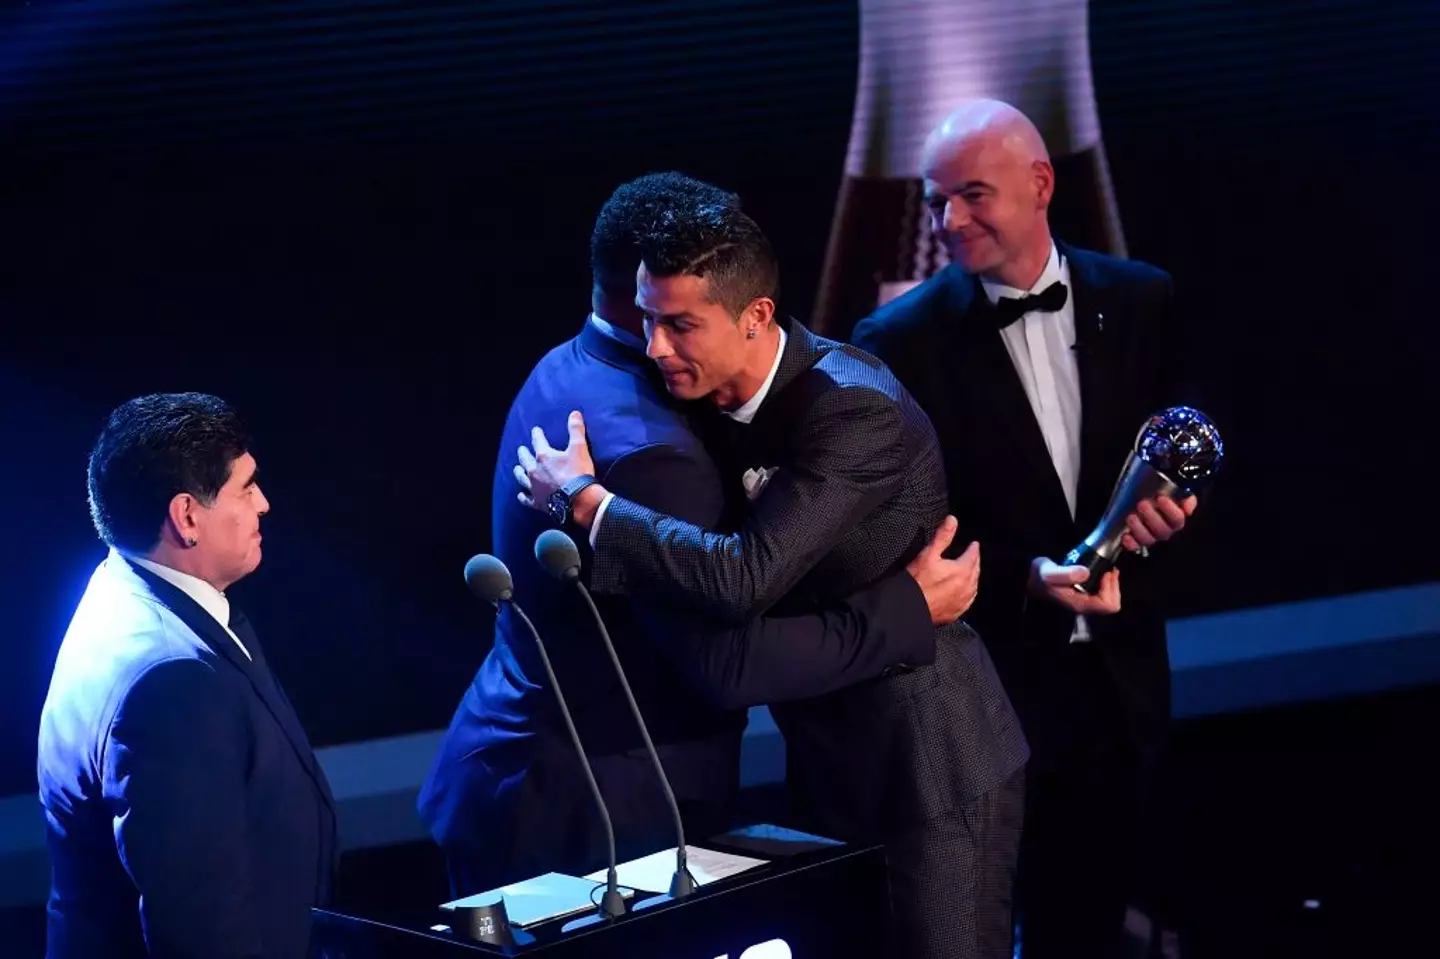 Both Ronaldo's at the FIFA Best- Getty